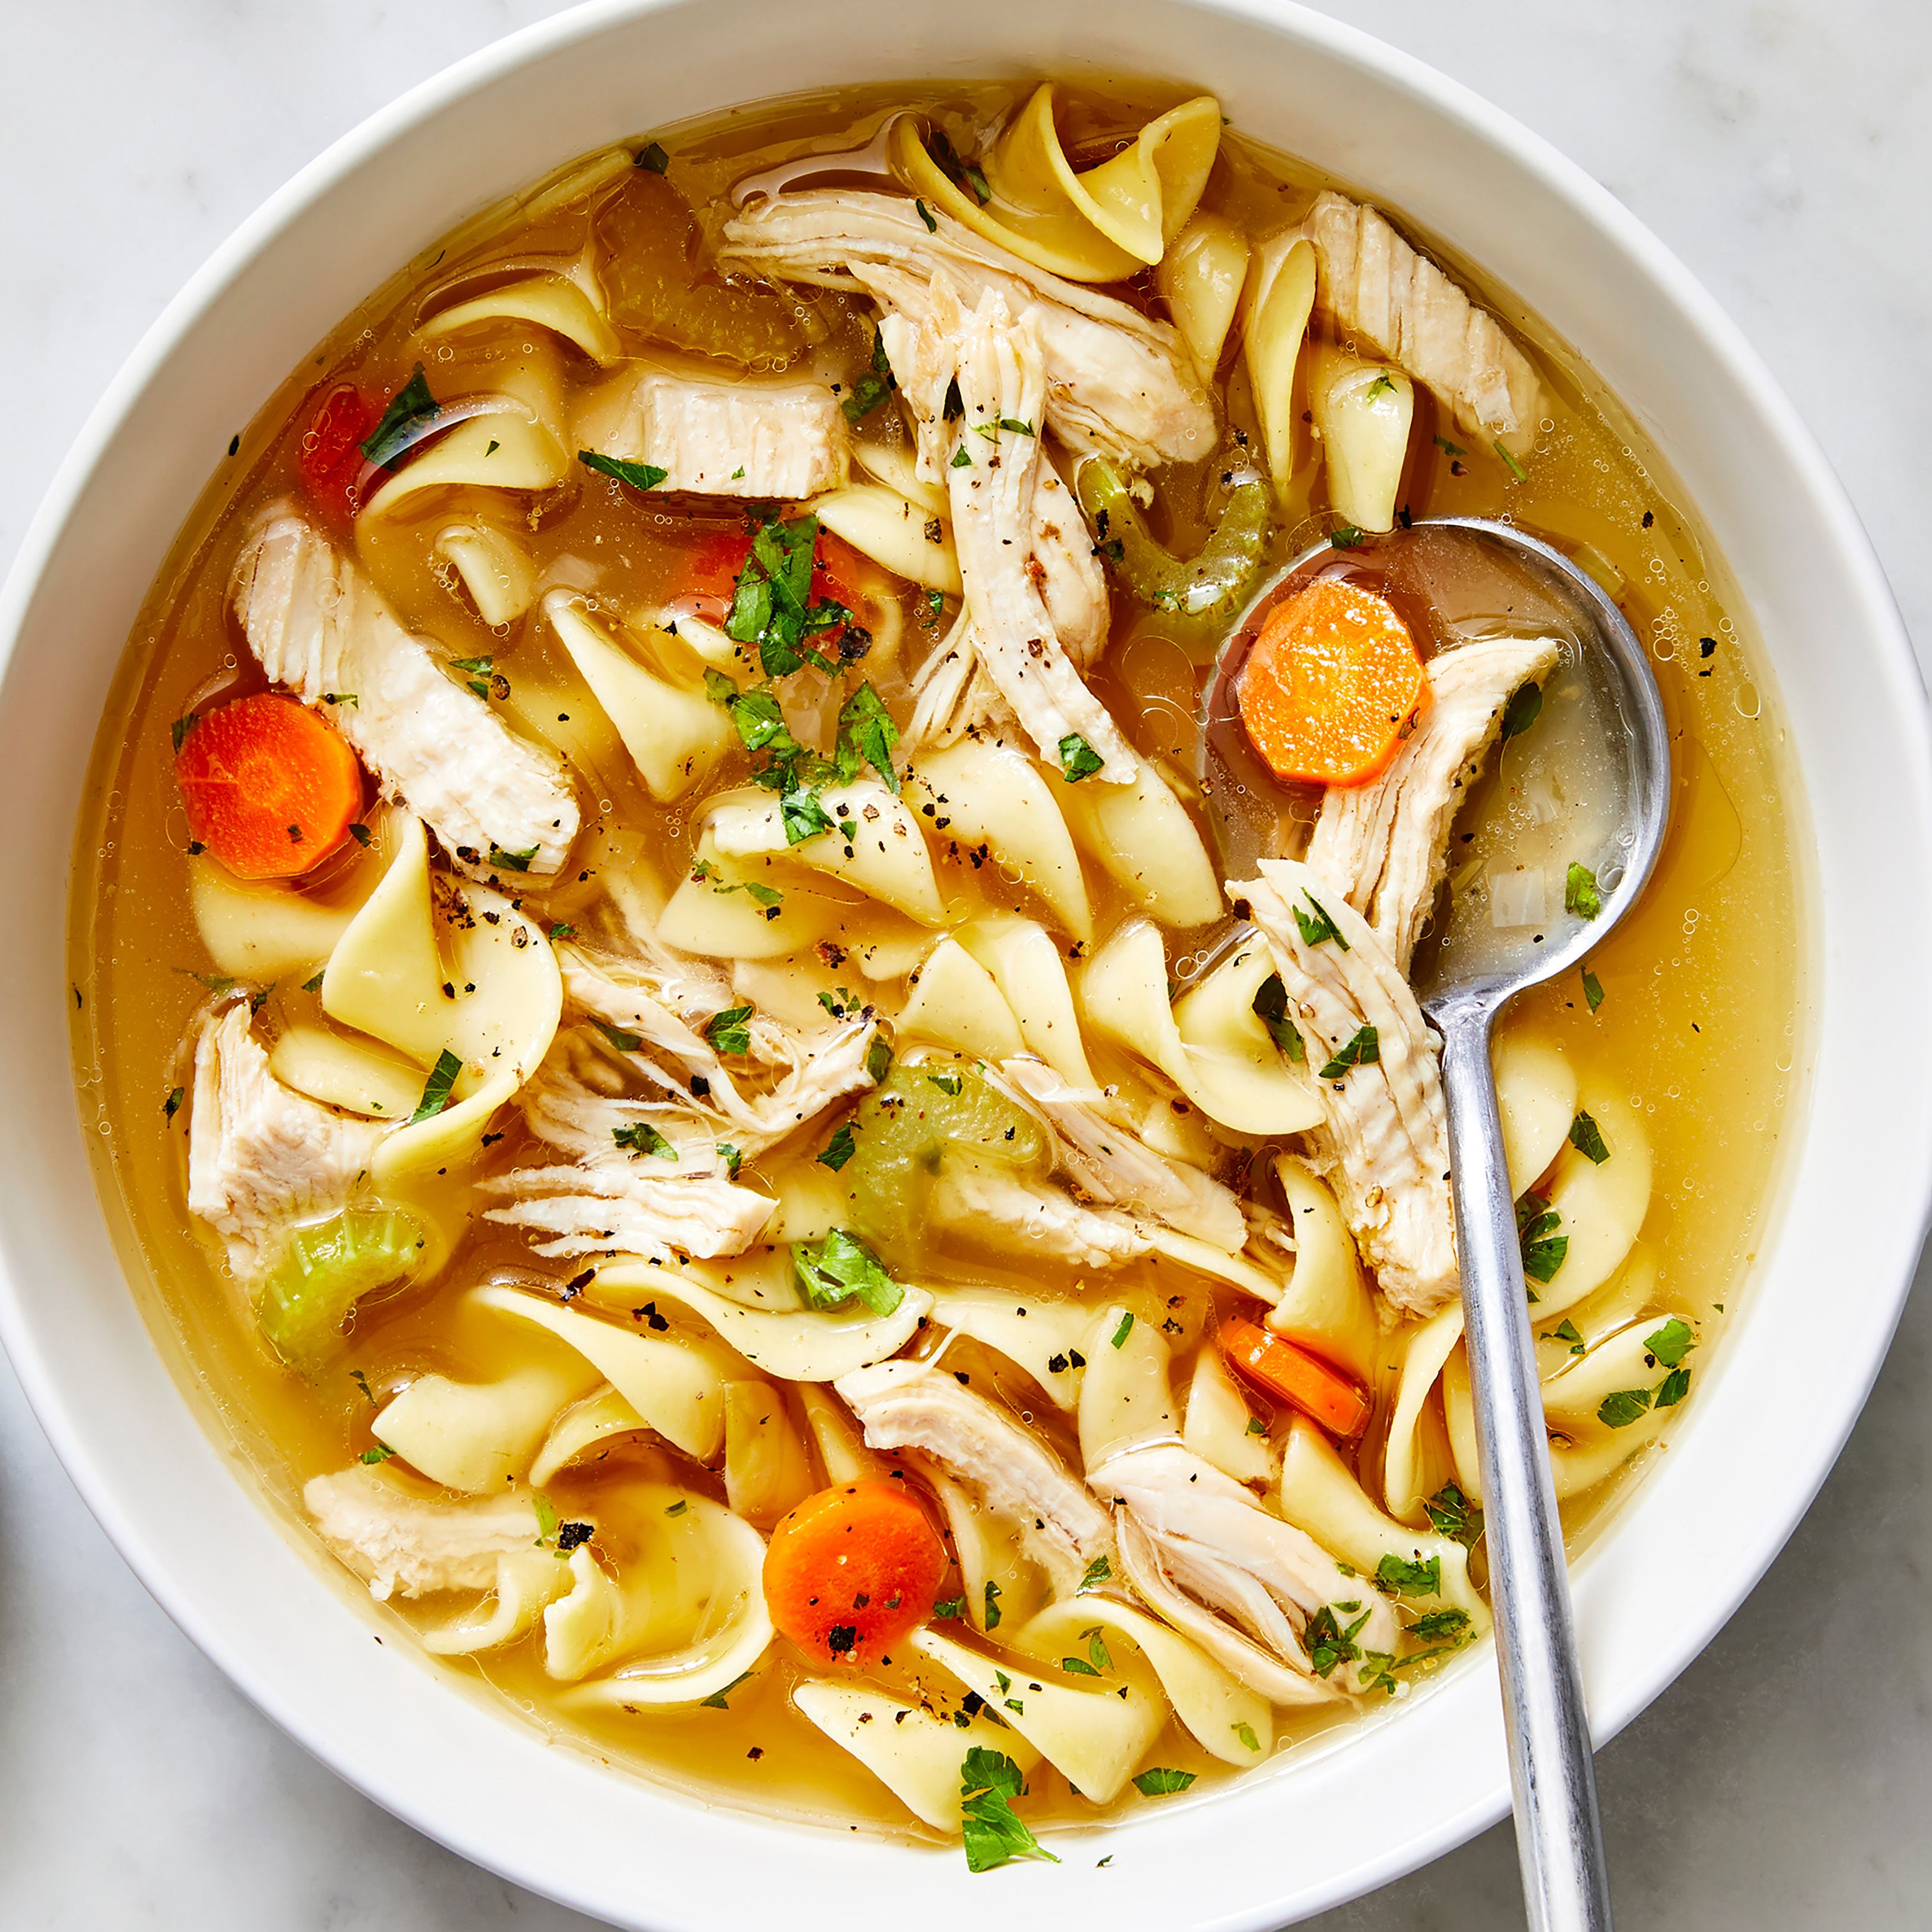 Literally the BEST Chicken Noodle Soup Recipe